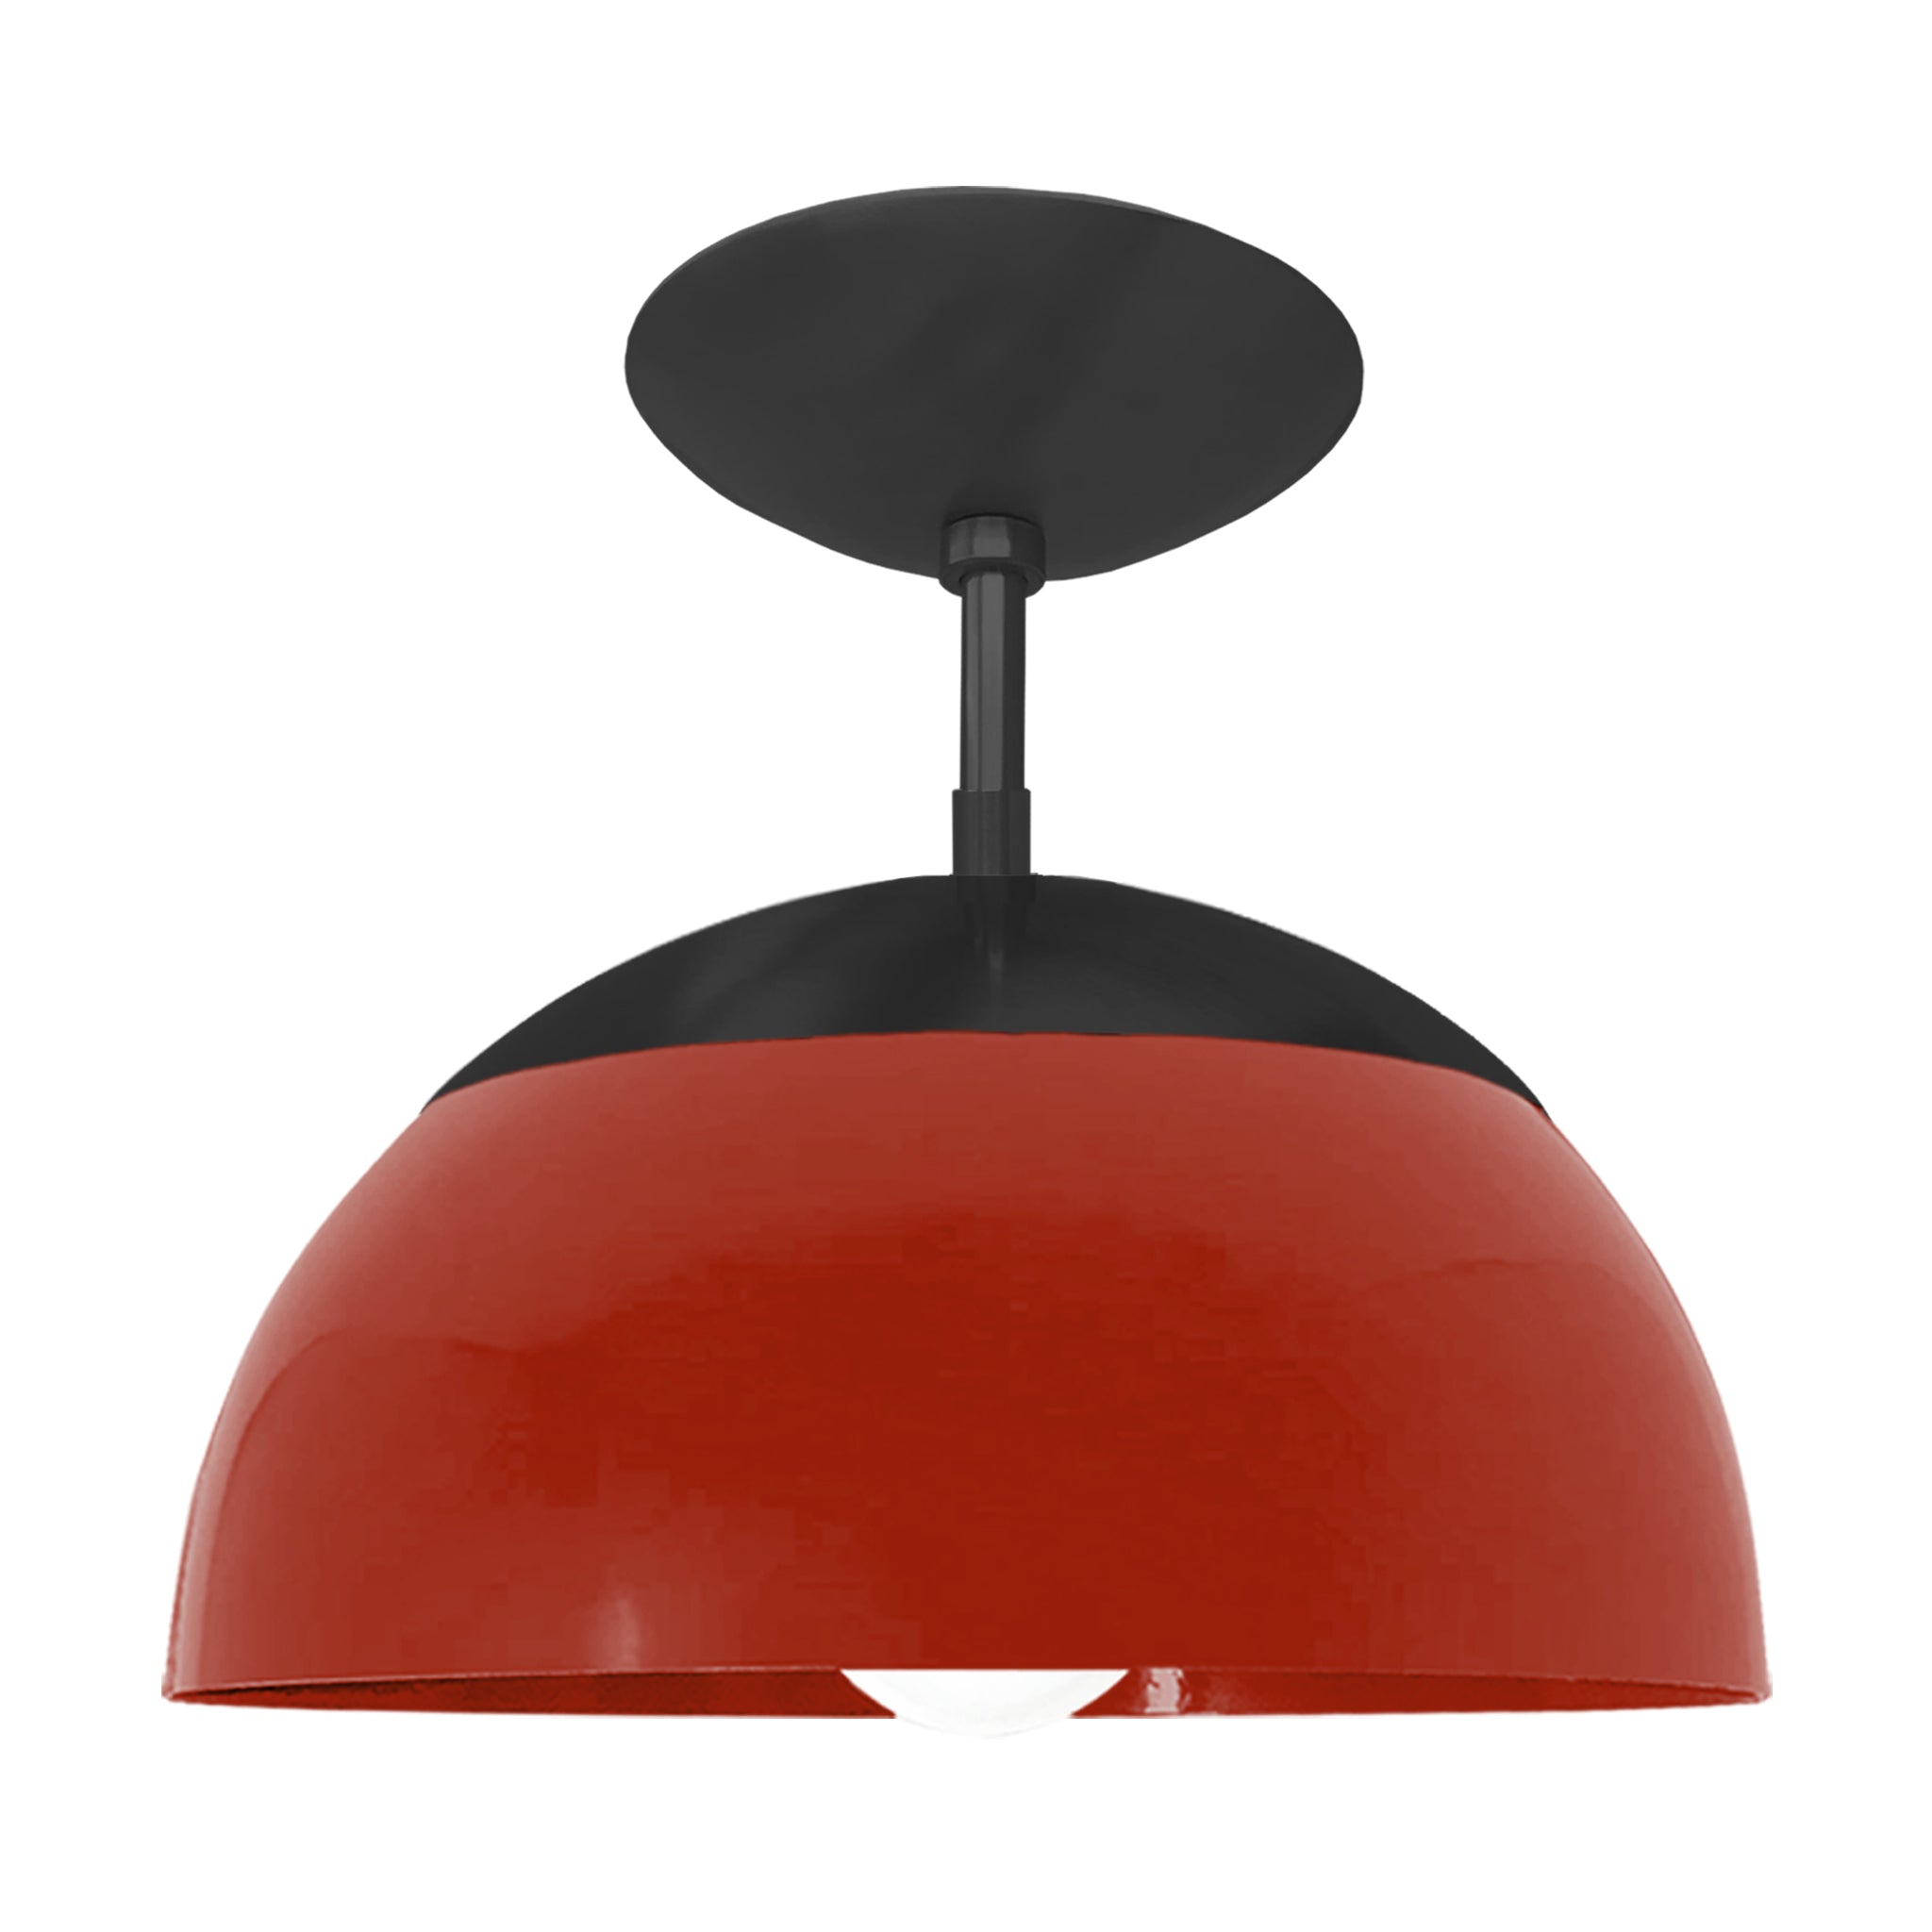 Black and riding hood red color Cadbury flush mount 12" Dutton Brown lighting